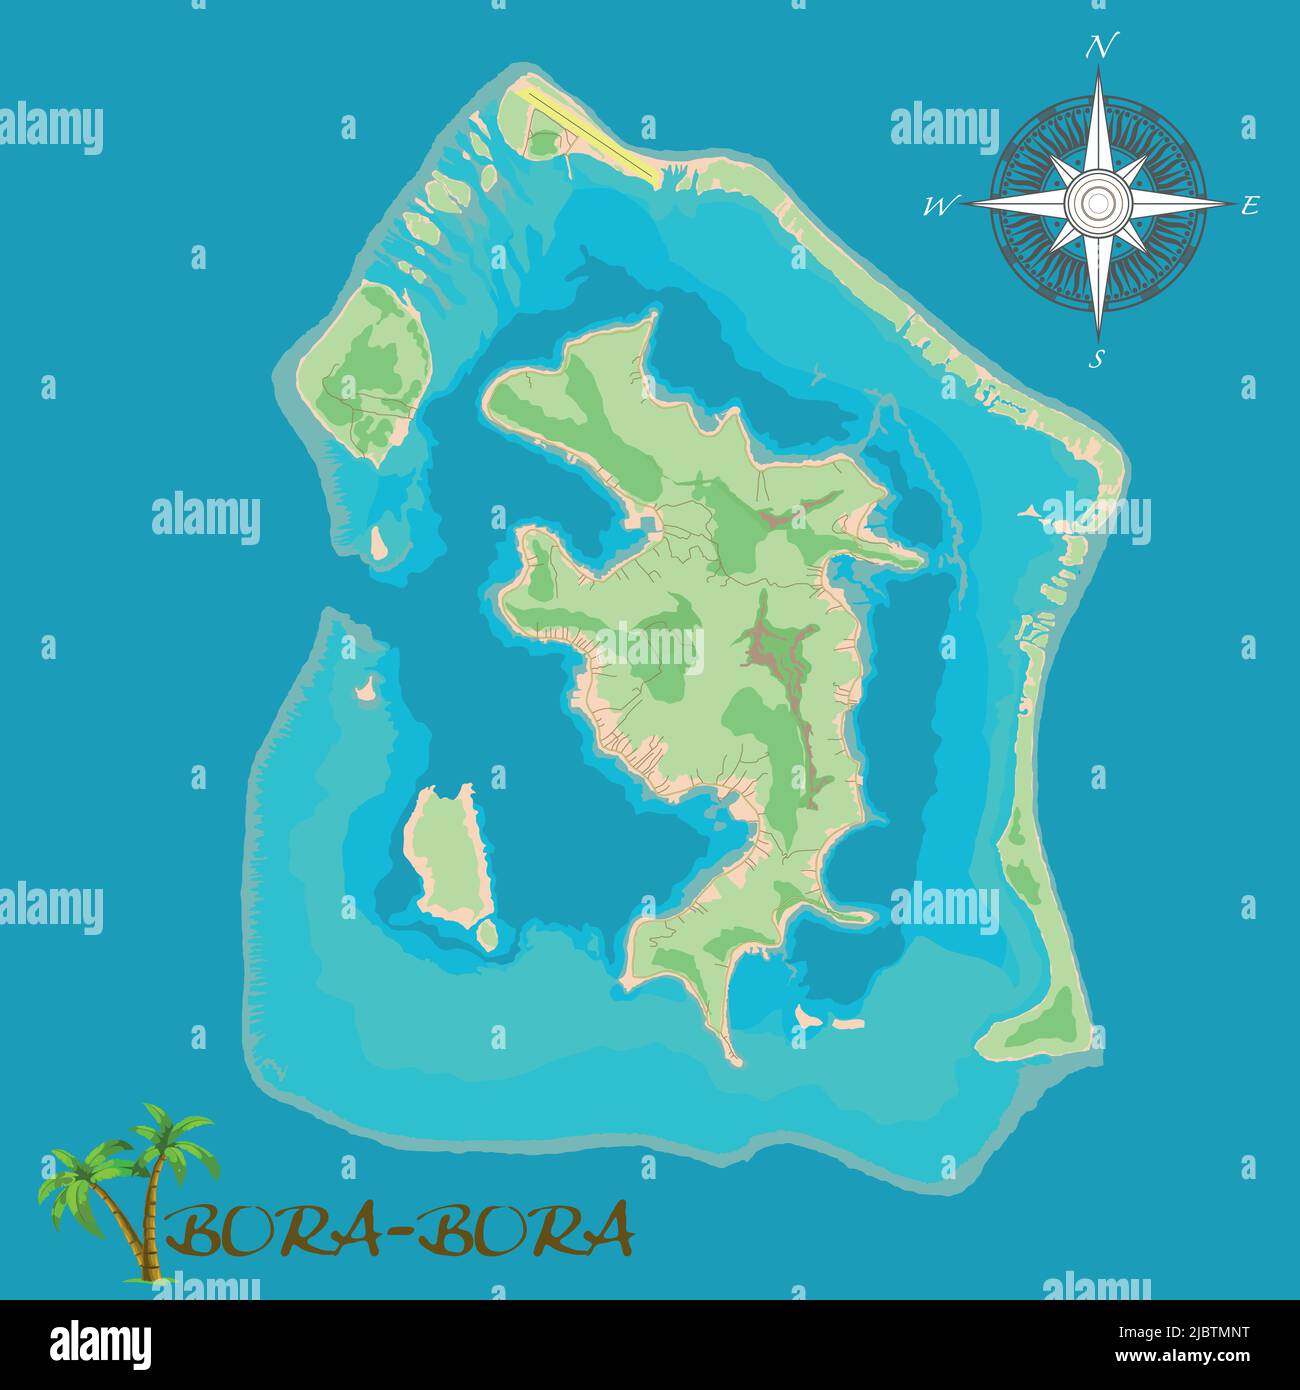 Bora-Bora Island. Realistic satellite background map with roads and airport location. Drawn with cartographic accuracy. A bird's-eye view. Stock Vector